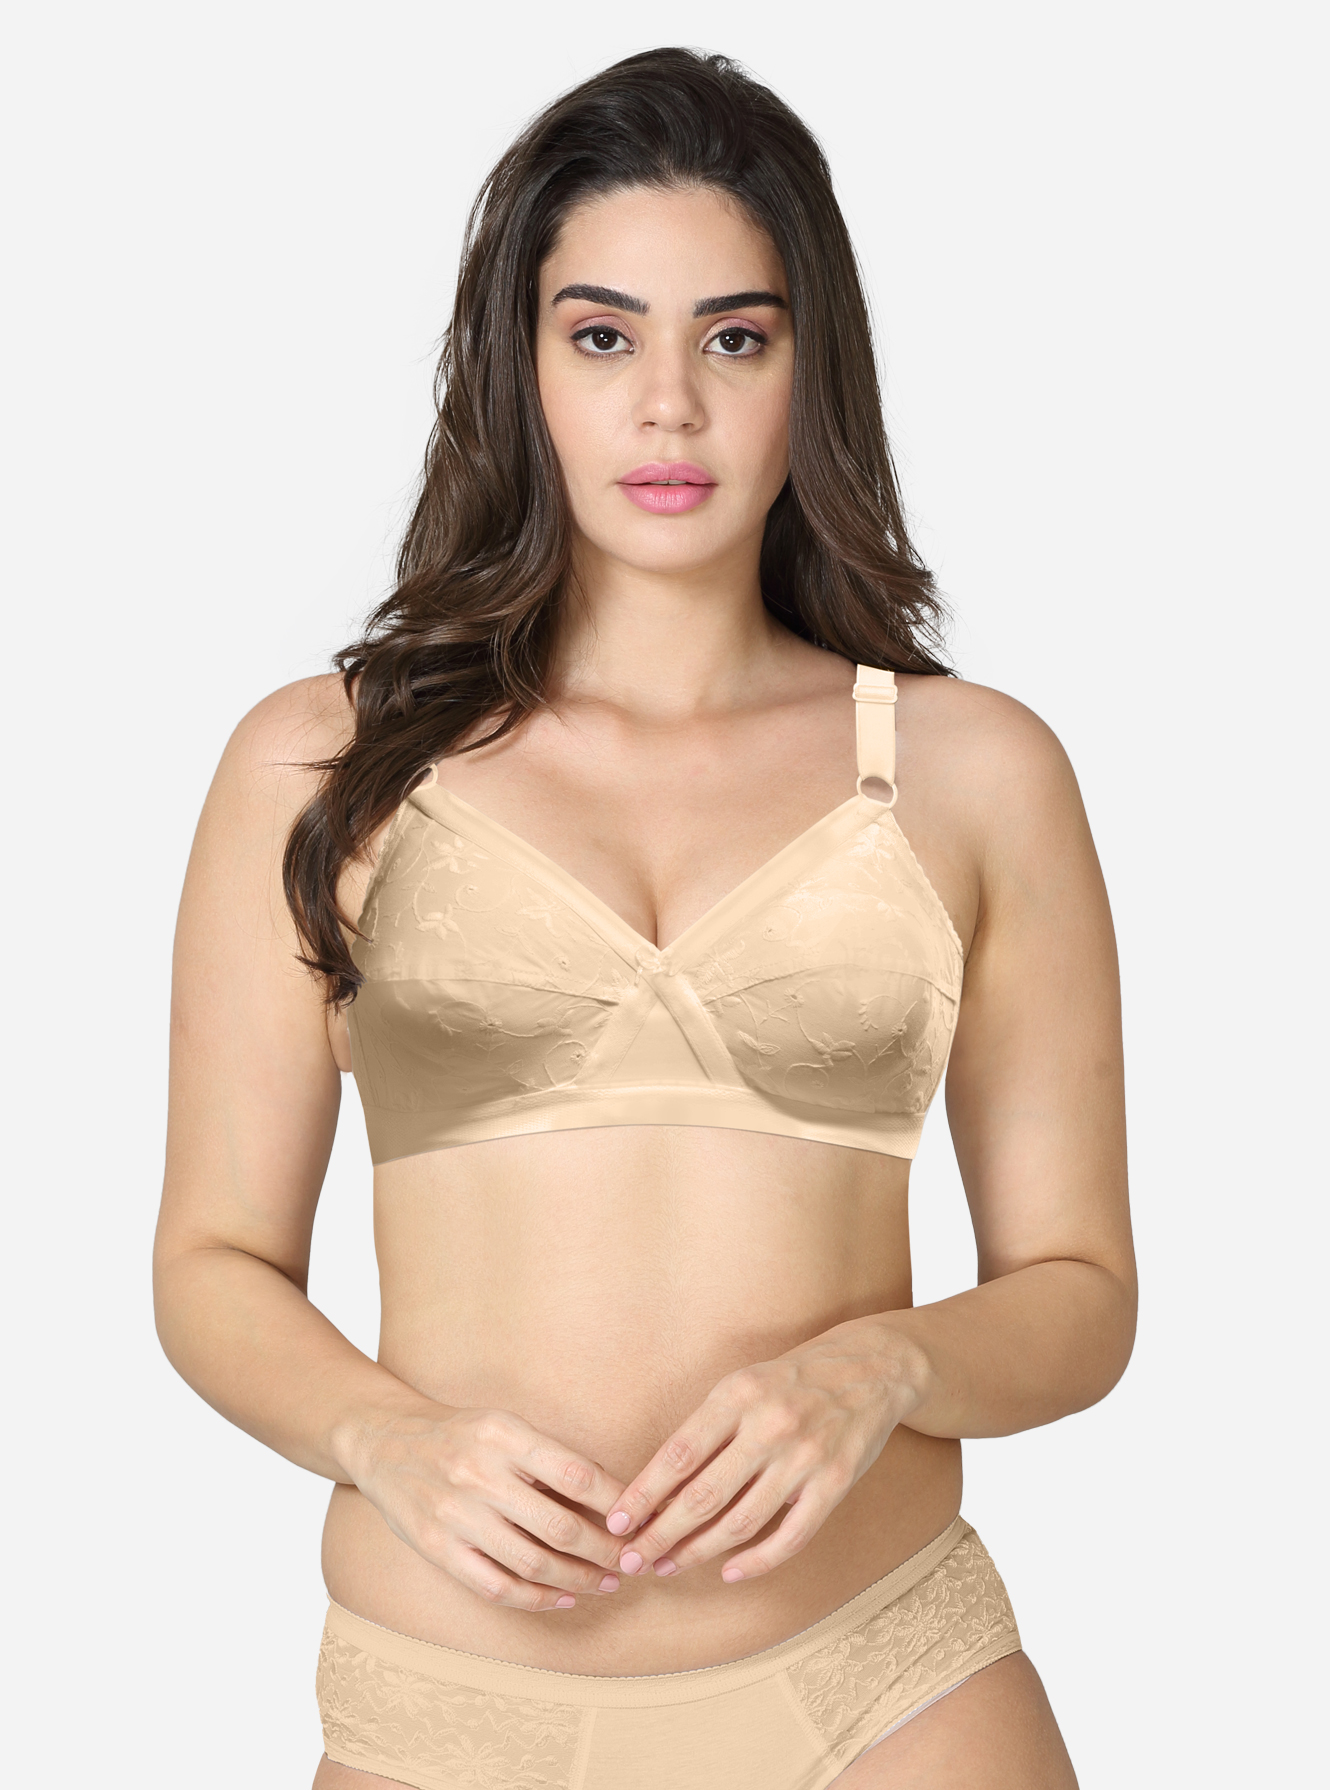 Pack of 3 Stretch Cotton Bras